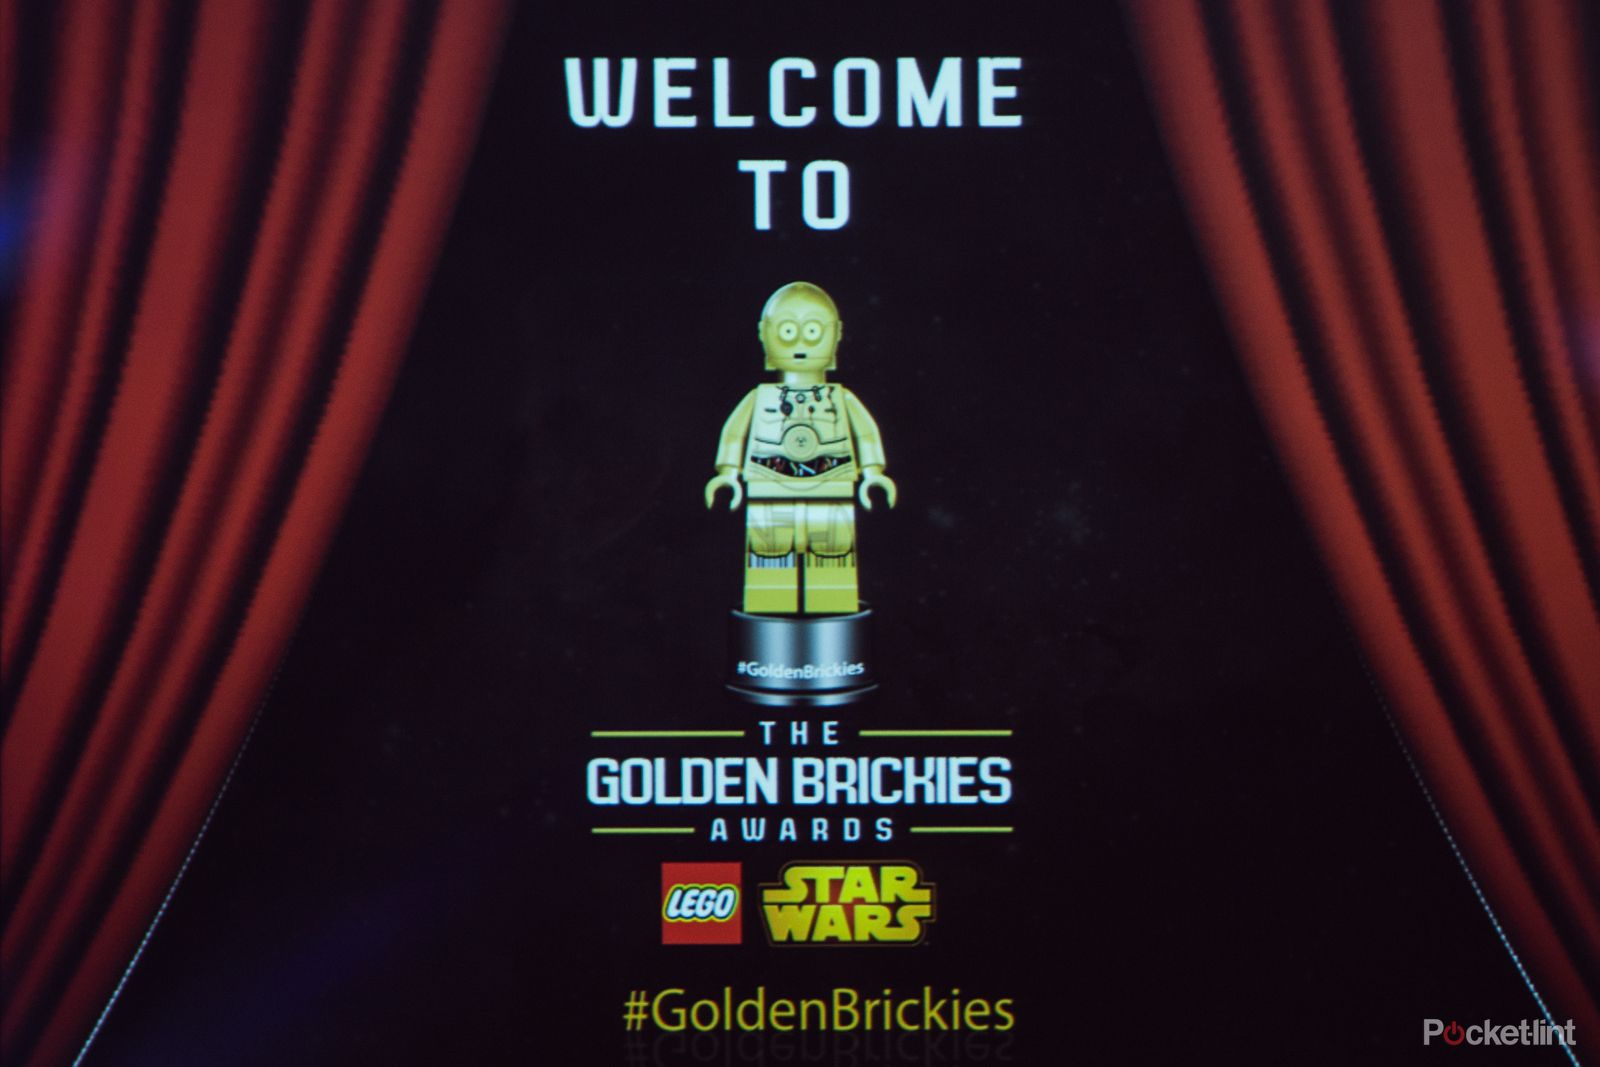 inaugural golden brickies celebrates star wars lego in perfect fan style image 1